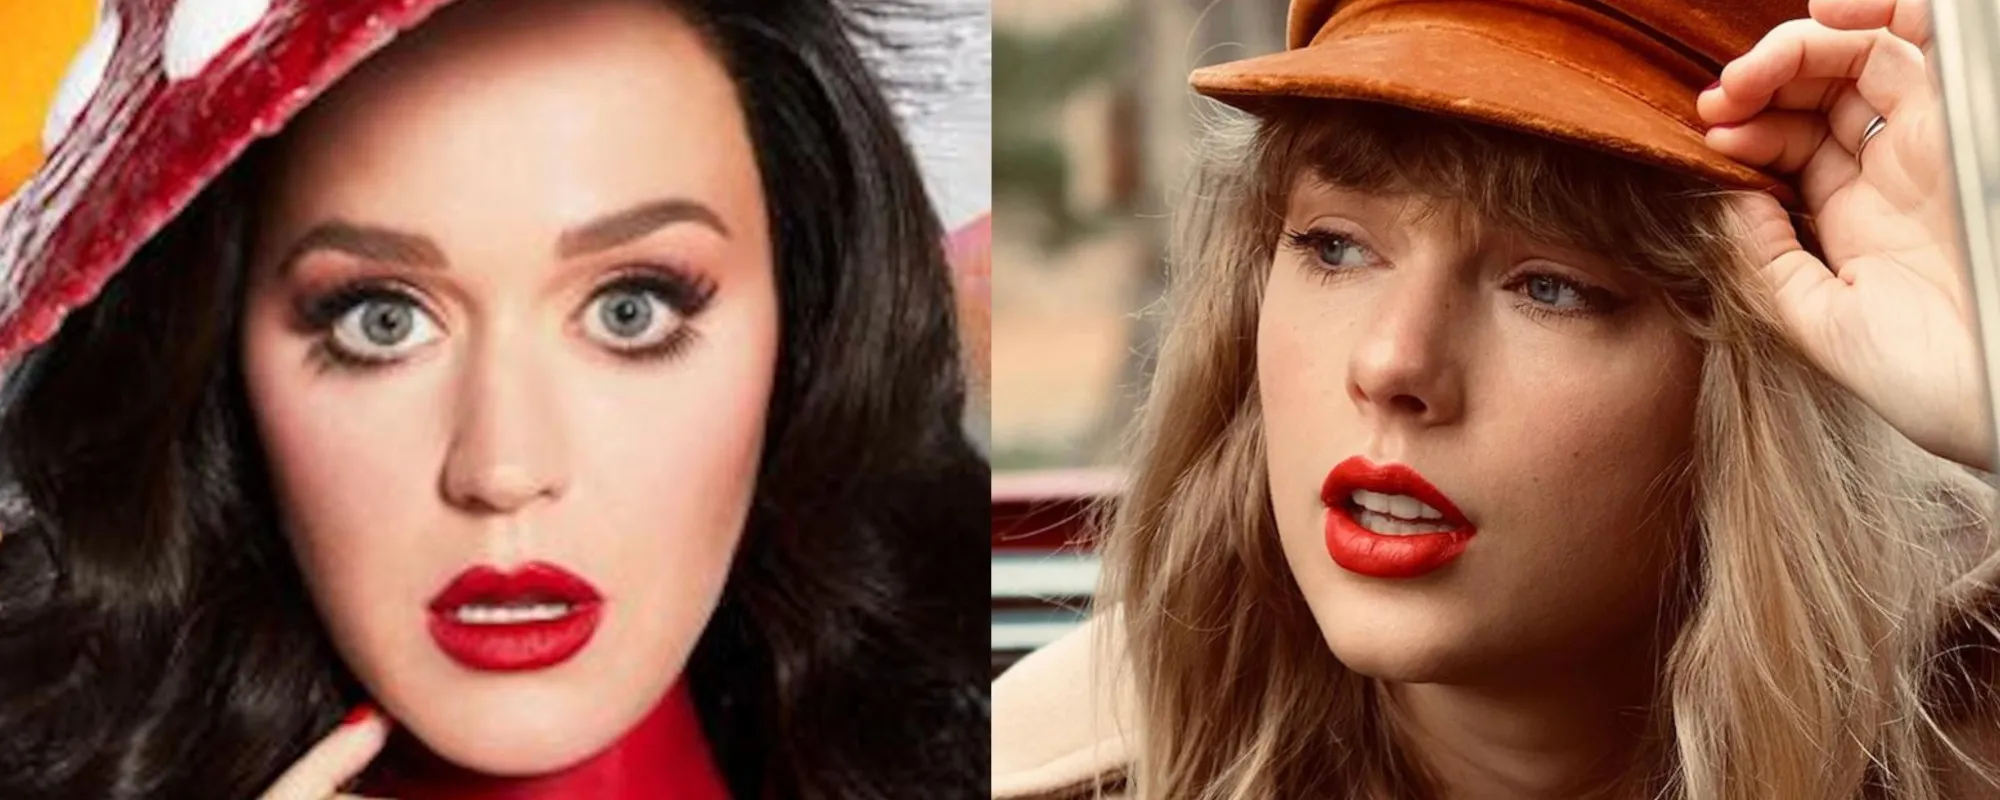 Behind the Beef: Katy Perry and Taylor Swift’s Feud Explained Blow By Blow